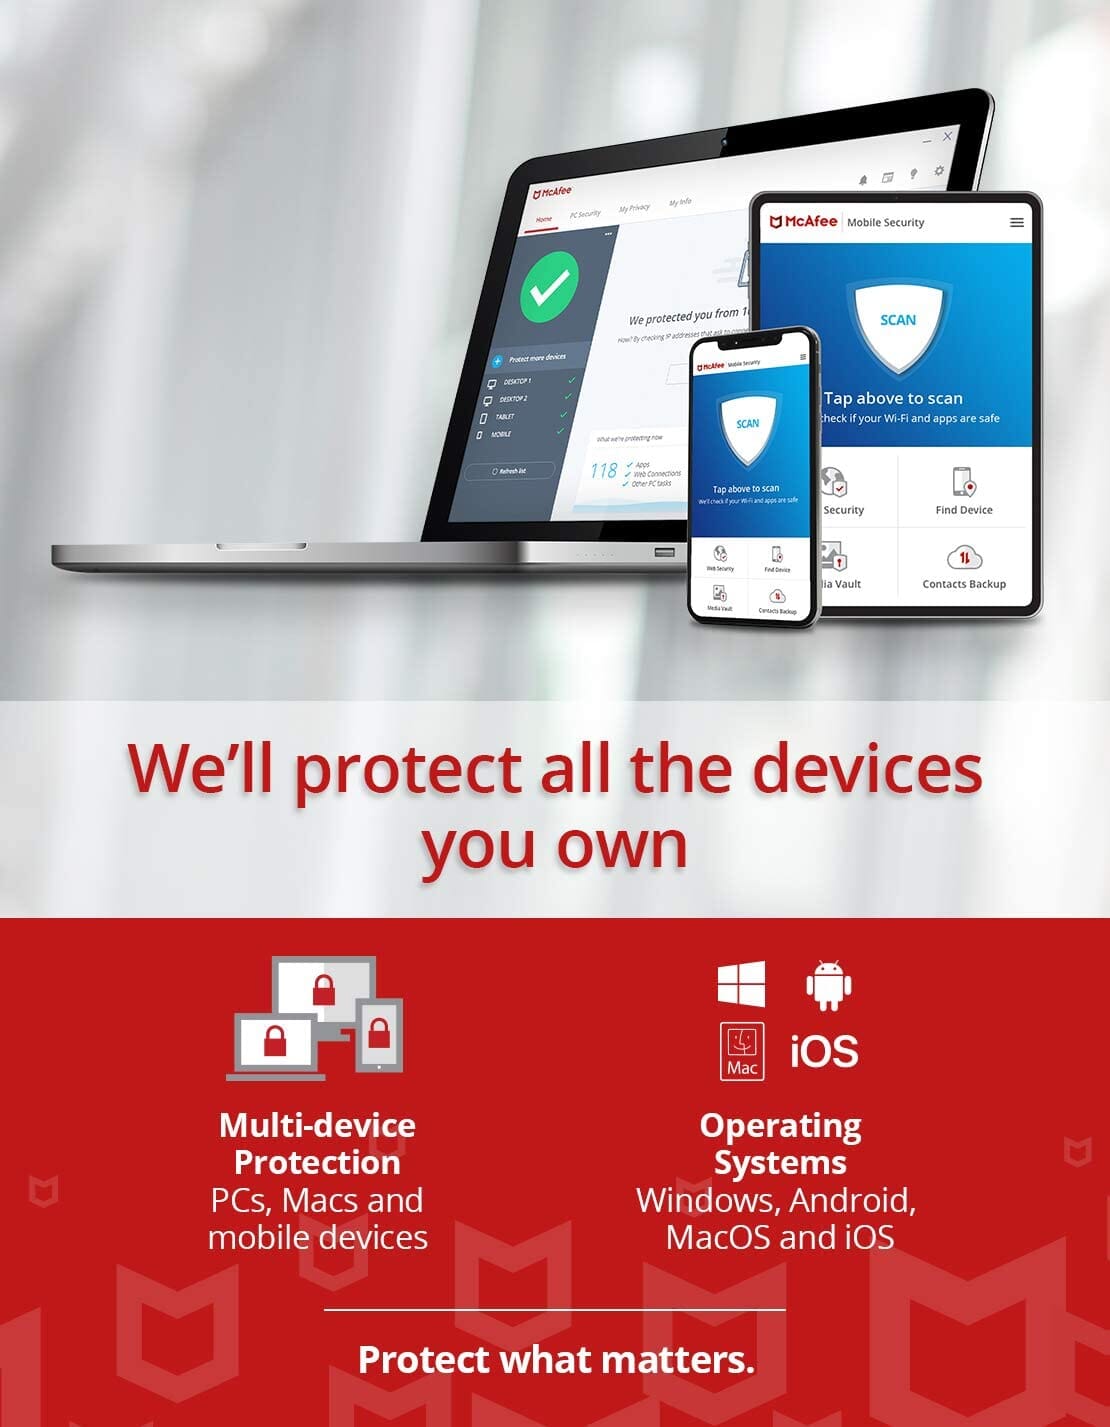 mcafee total protection 2018 review